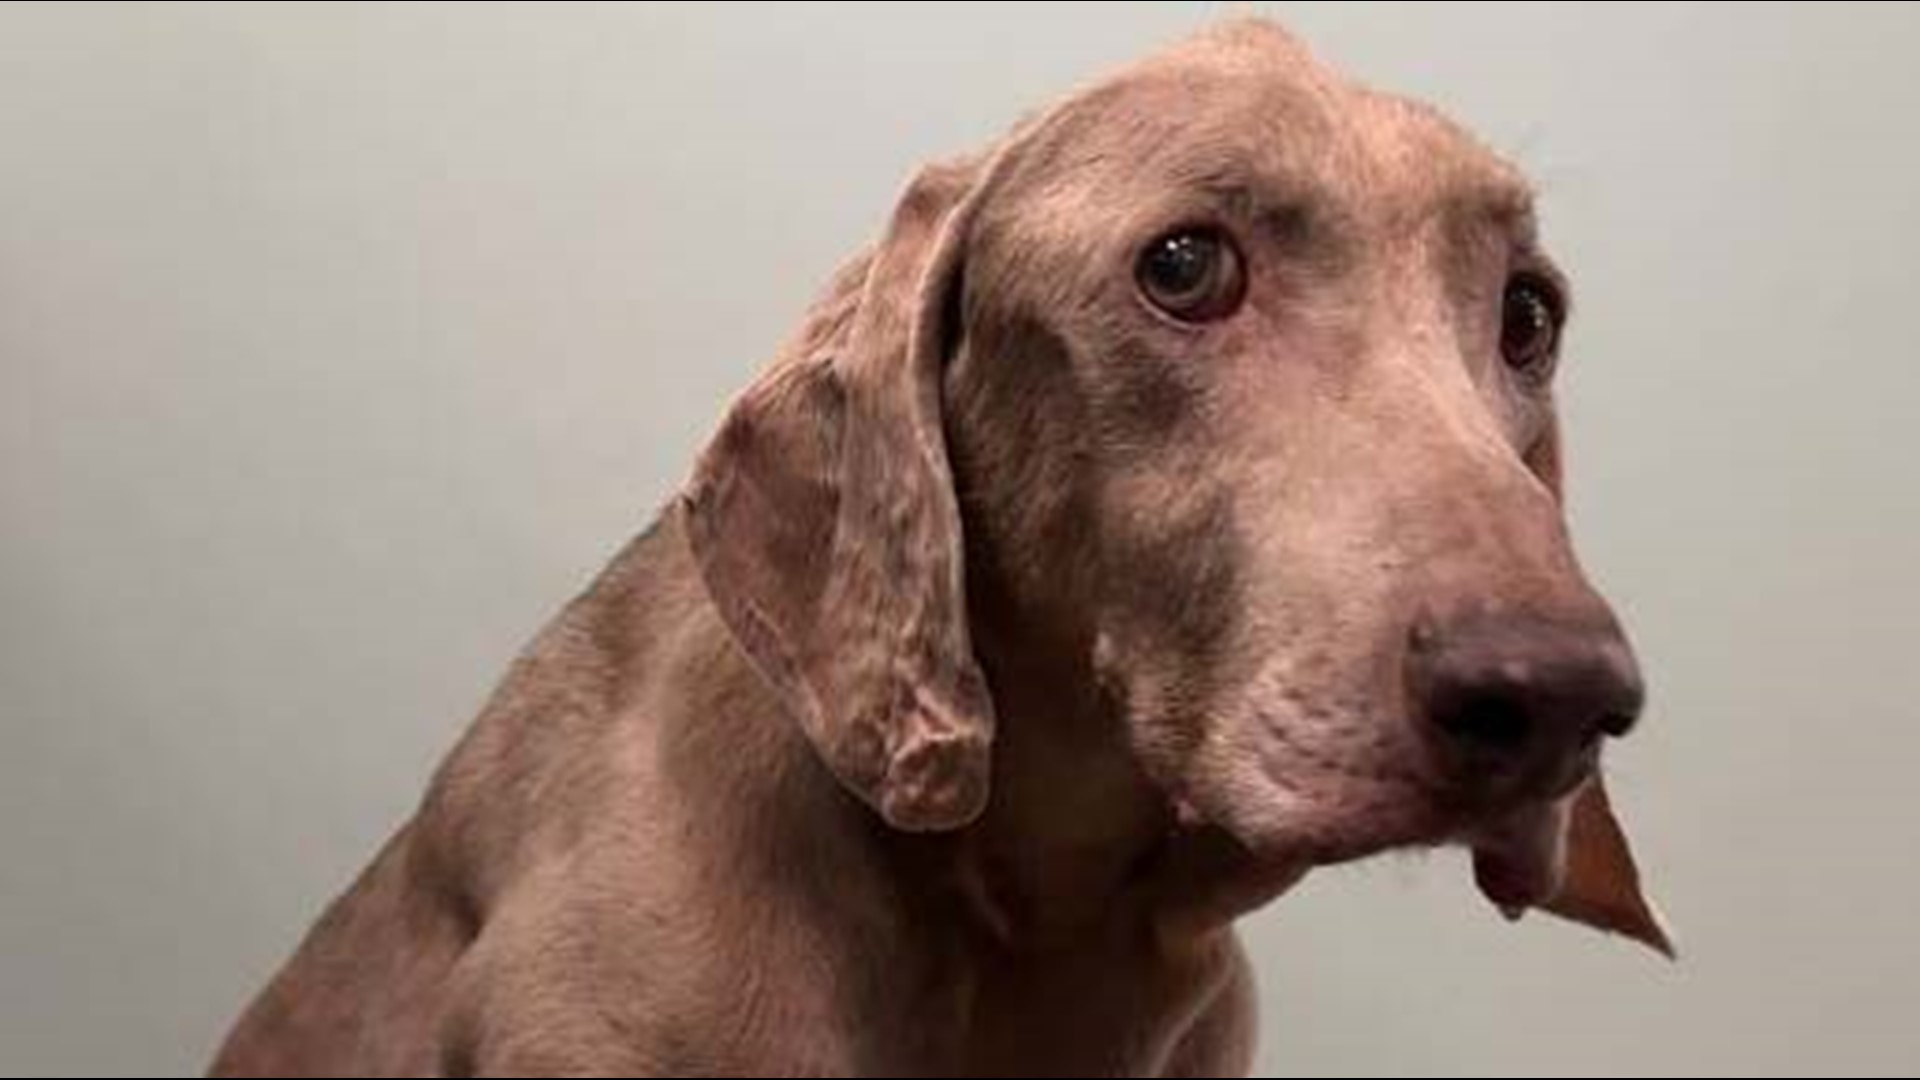 Dax had been with his previous owners for nearly two decades so he was understandably sad and confused when they gave him away.